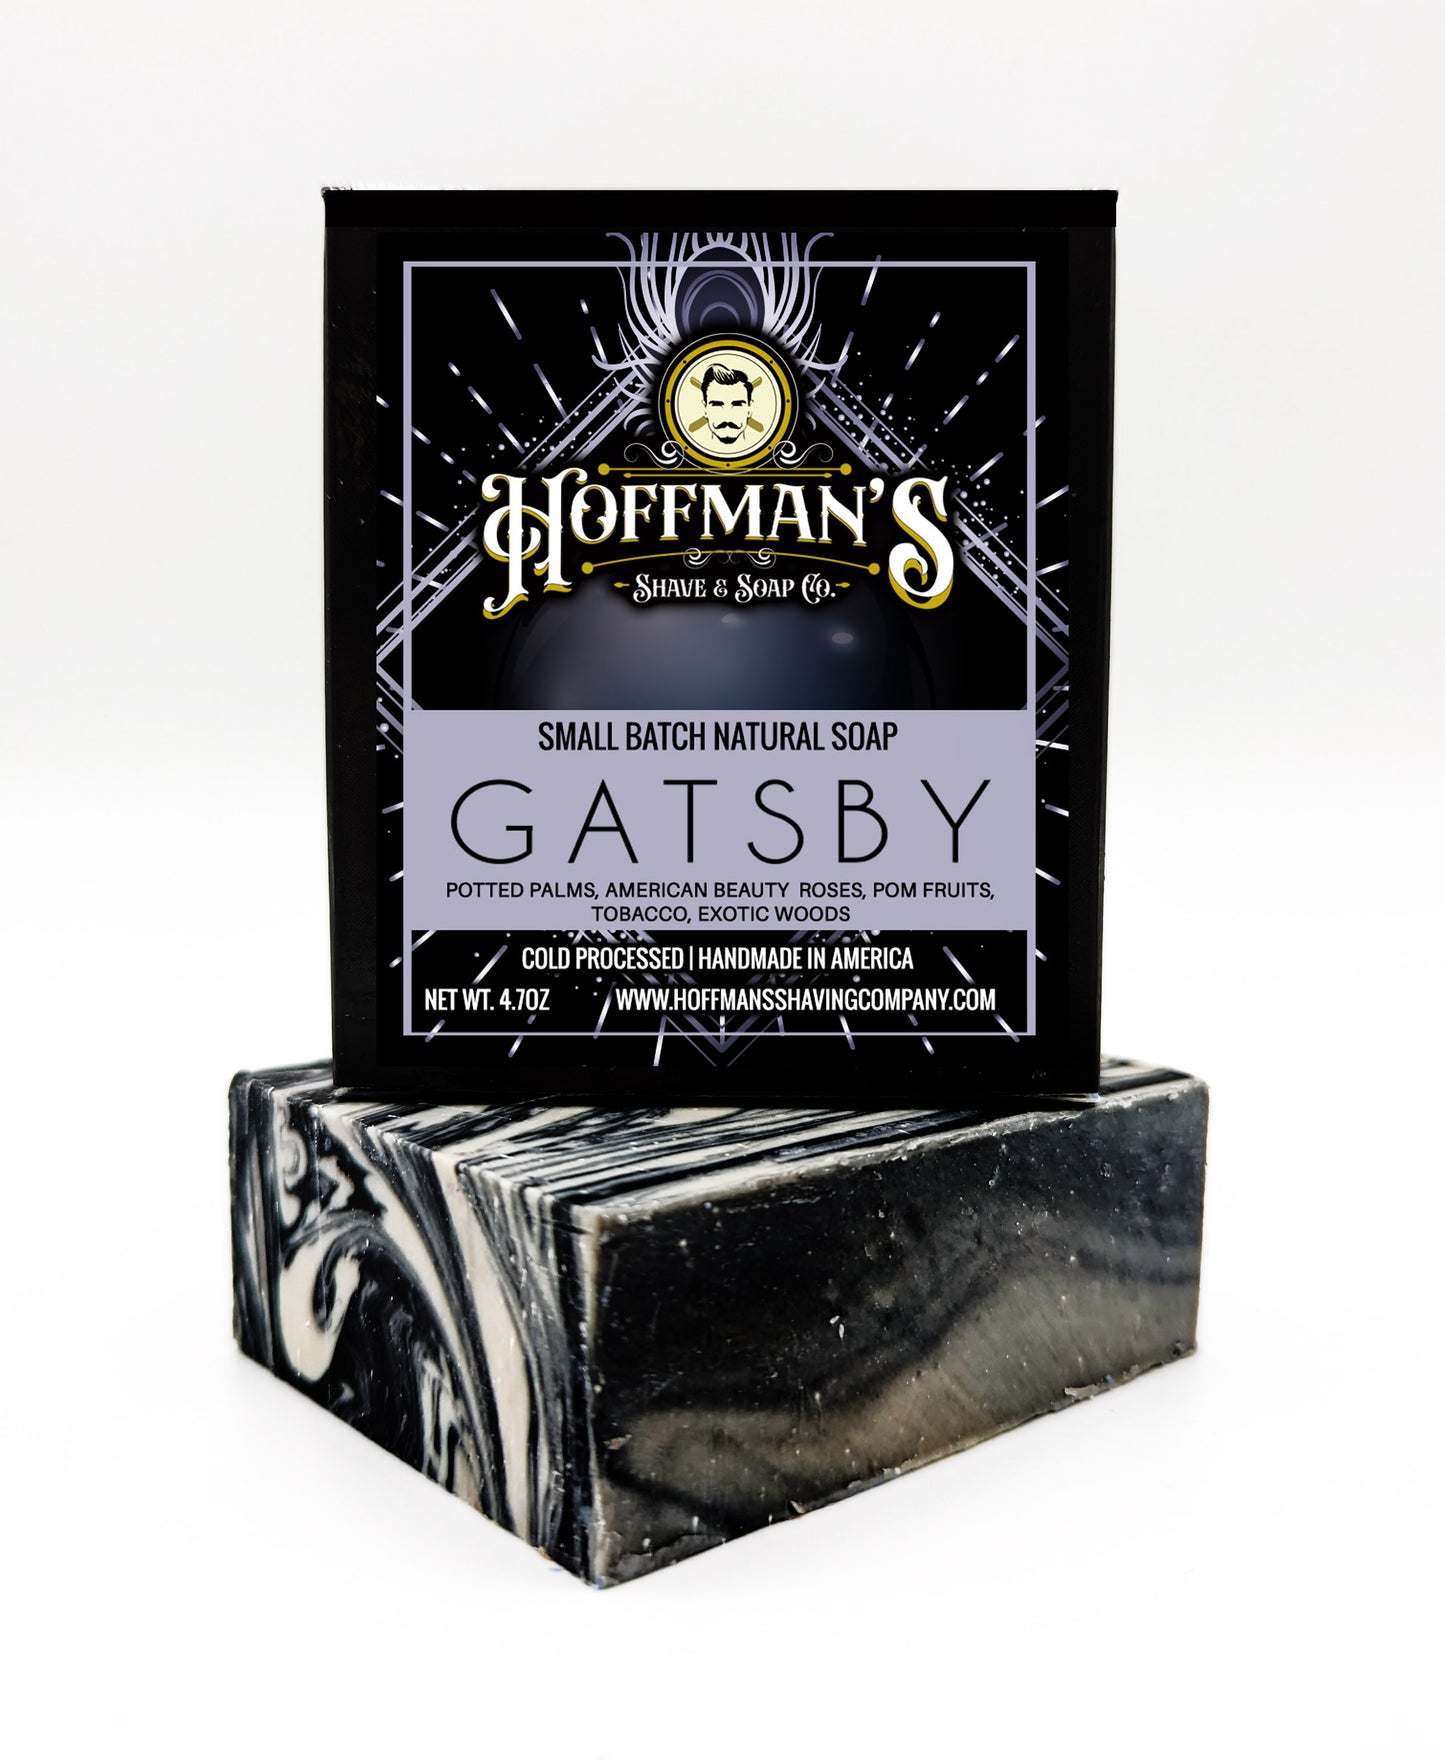 "Gatsby" (American Beauty Roses, Tobacco, Exotic Woods) Bar Soap